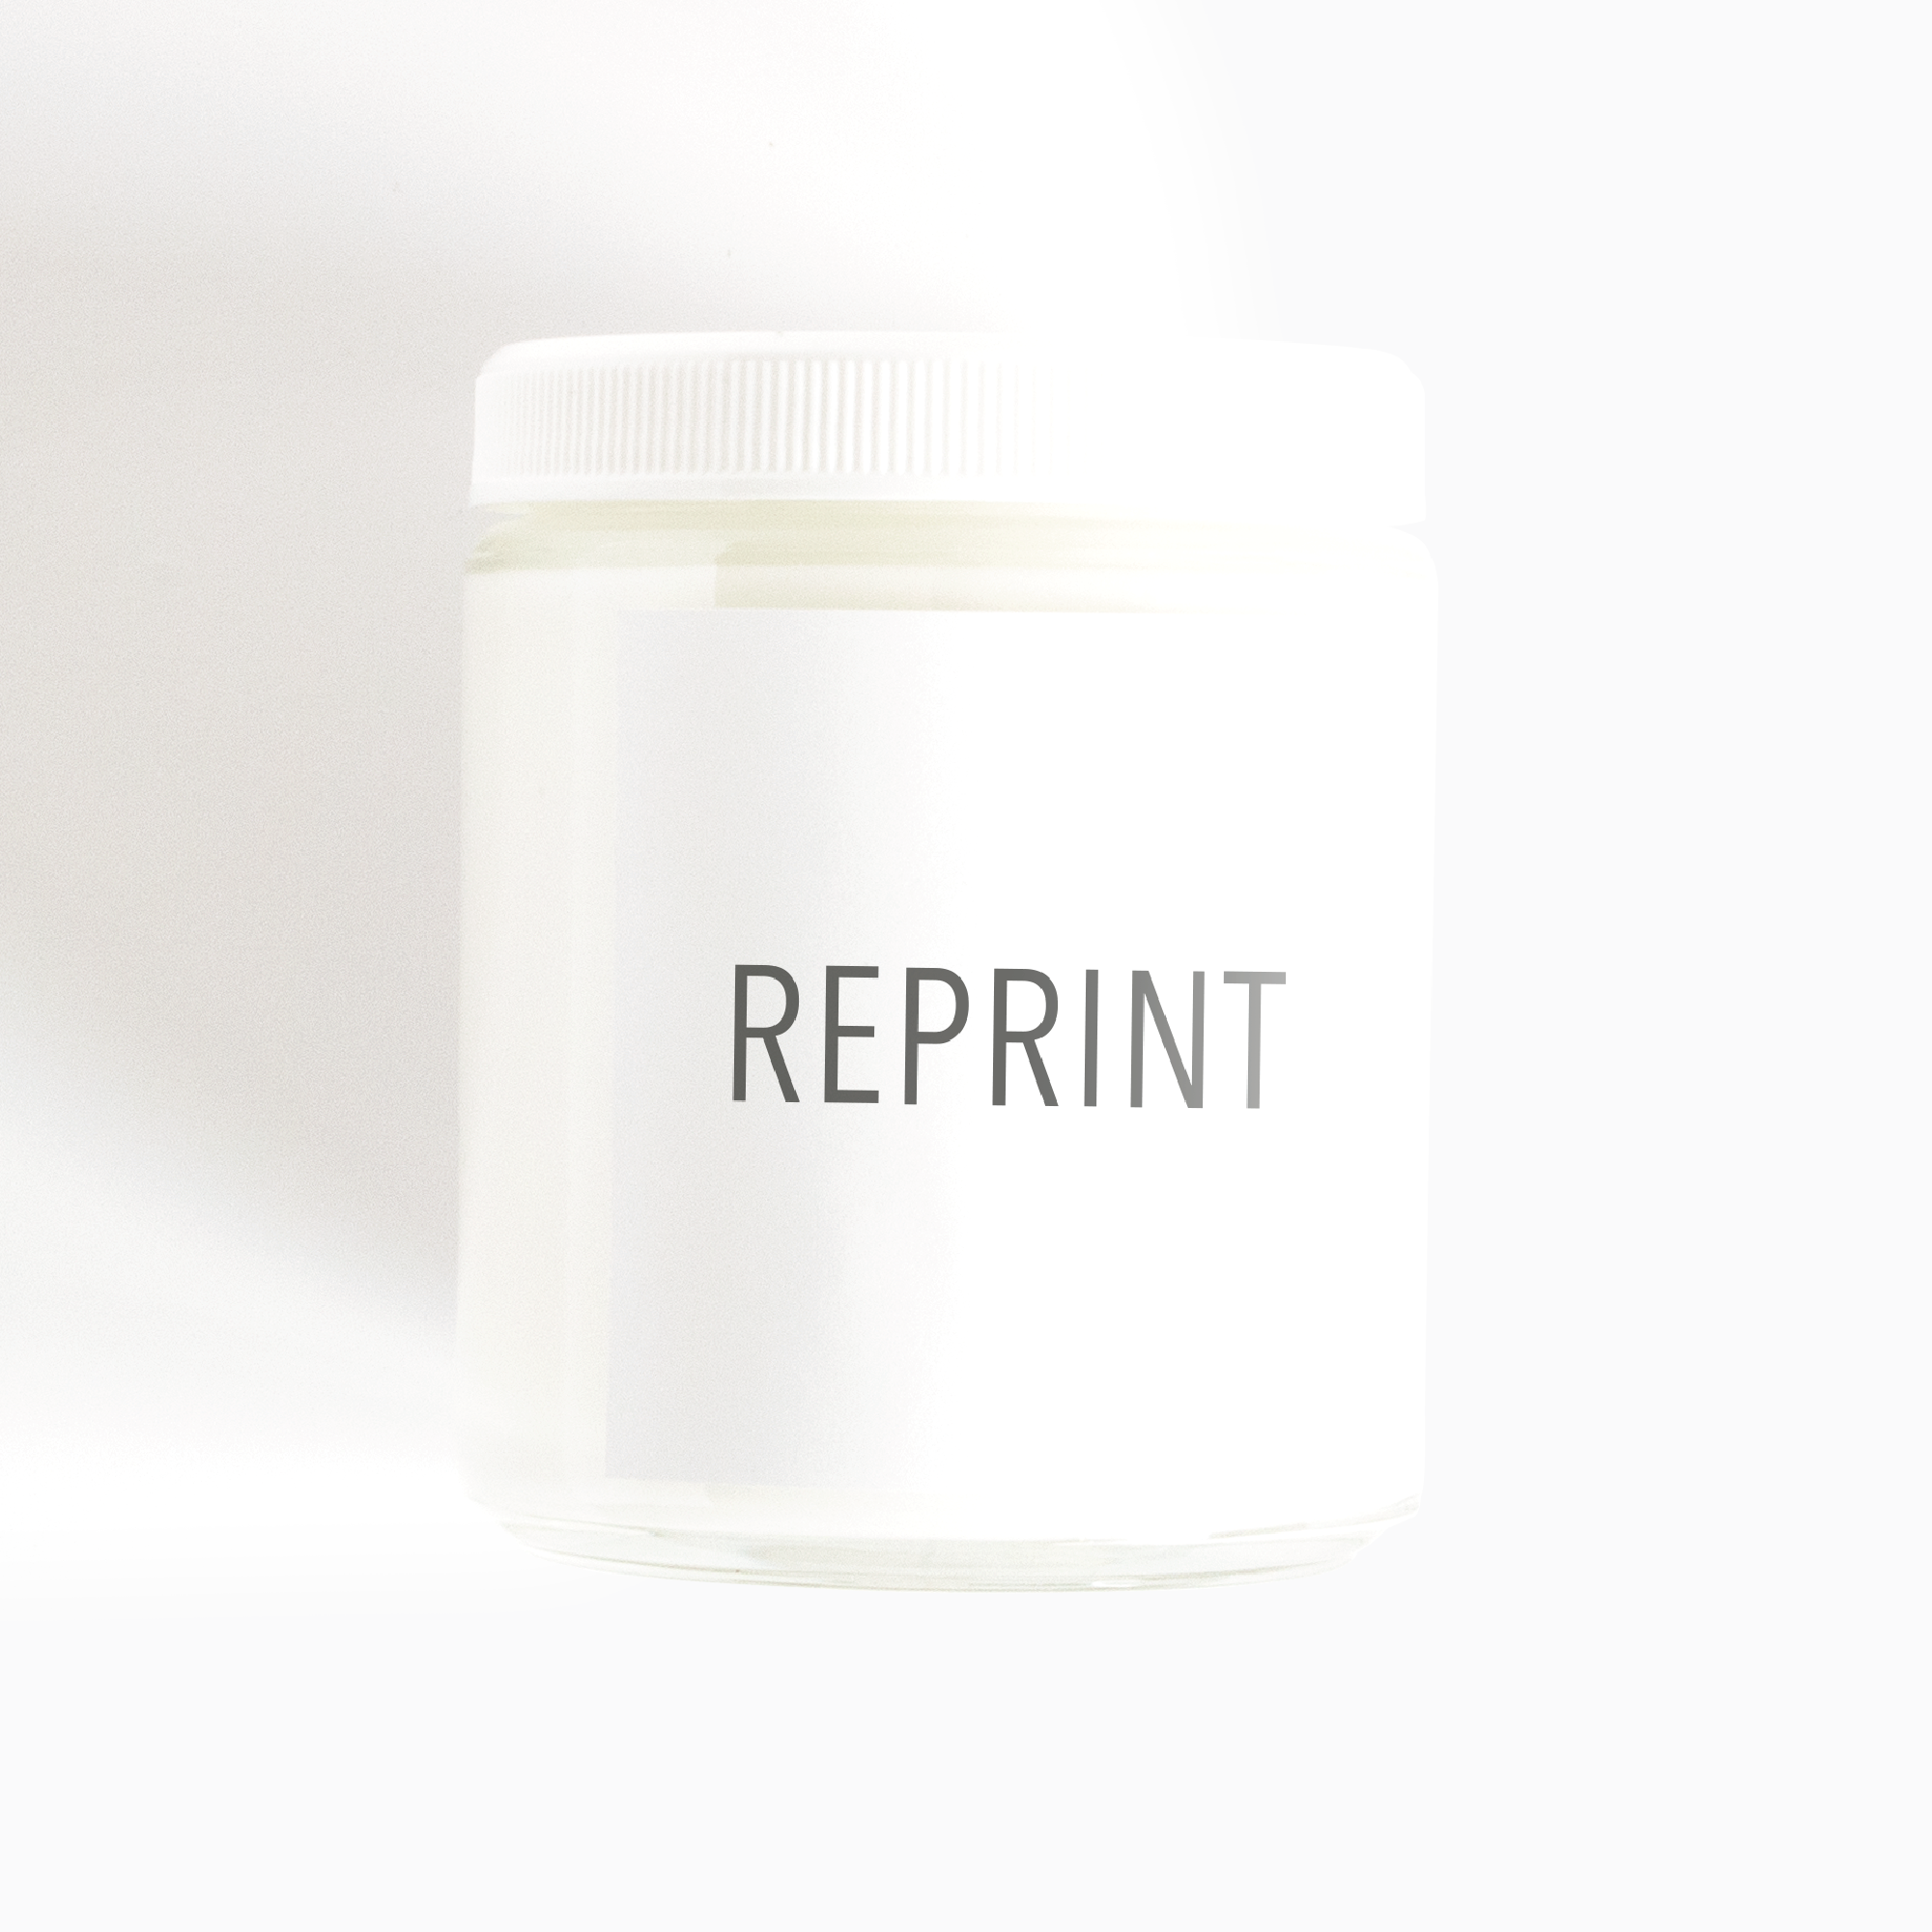 Reprint Your Square Product Label